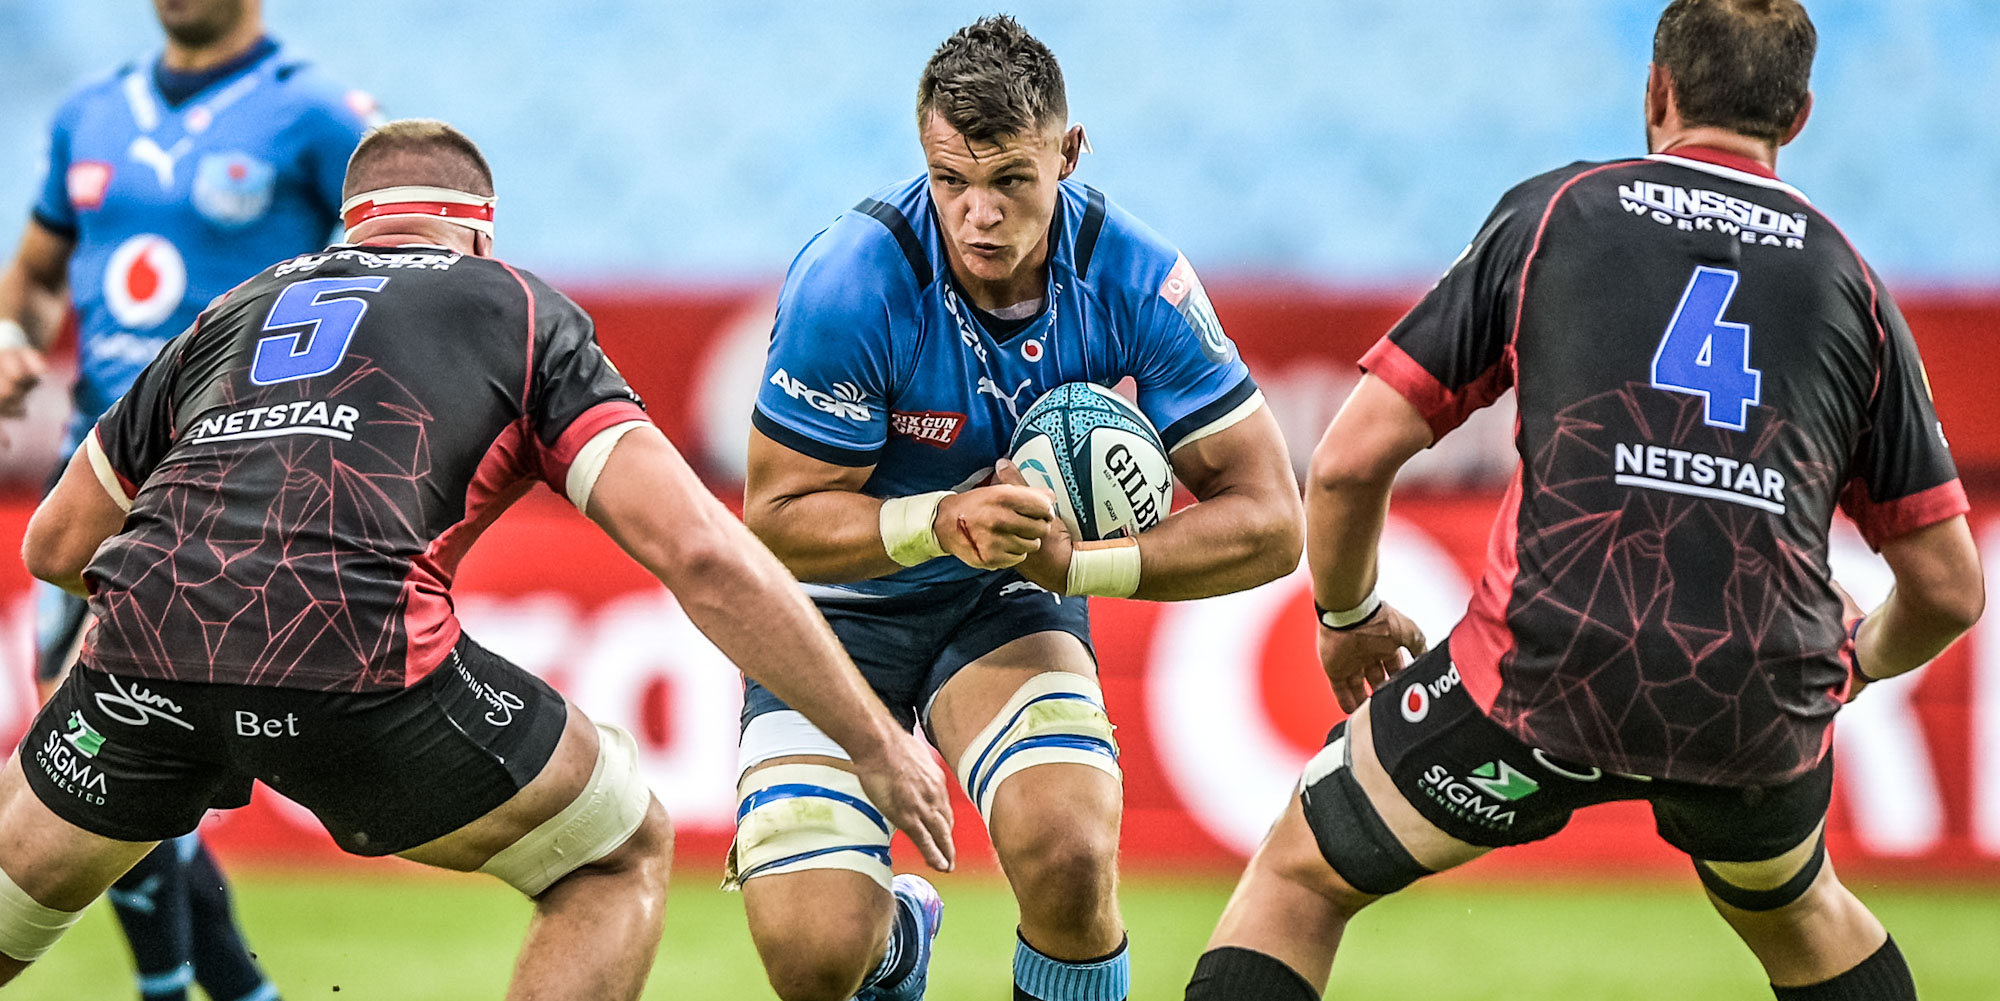 Barnstorming Vodacom Bulls No 8 Elrigh Louw in action against the Emirates Lions.